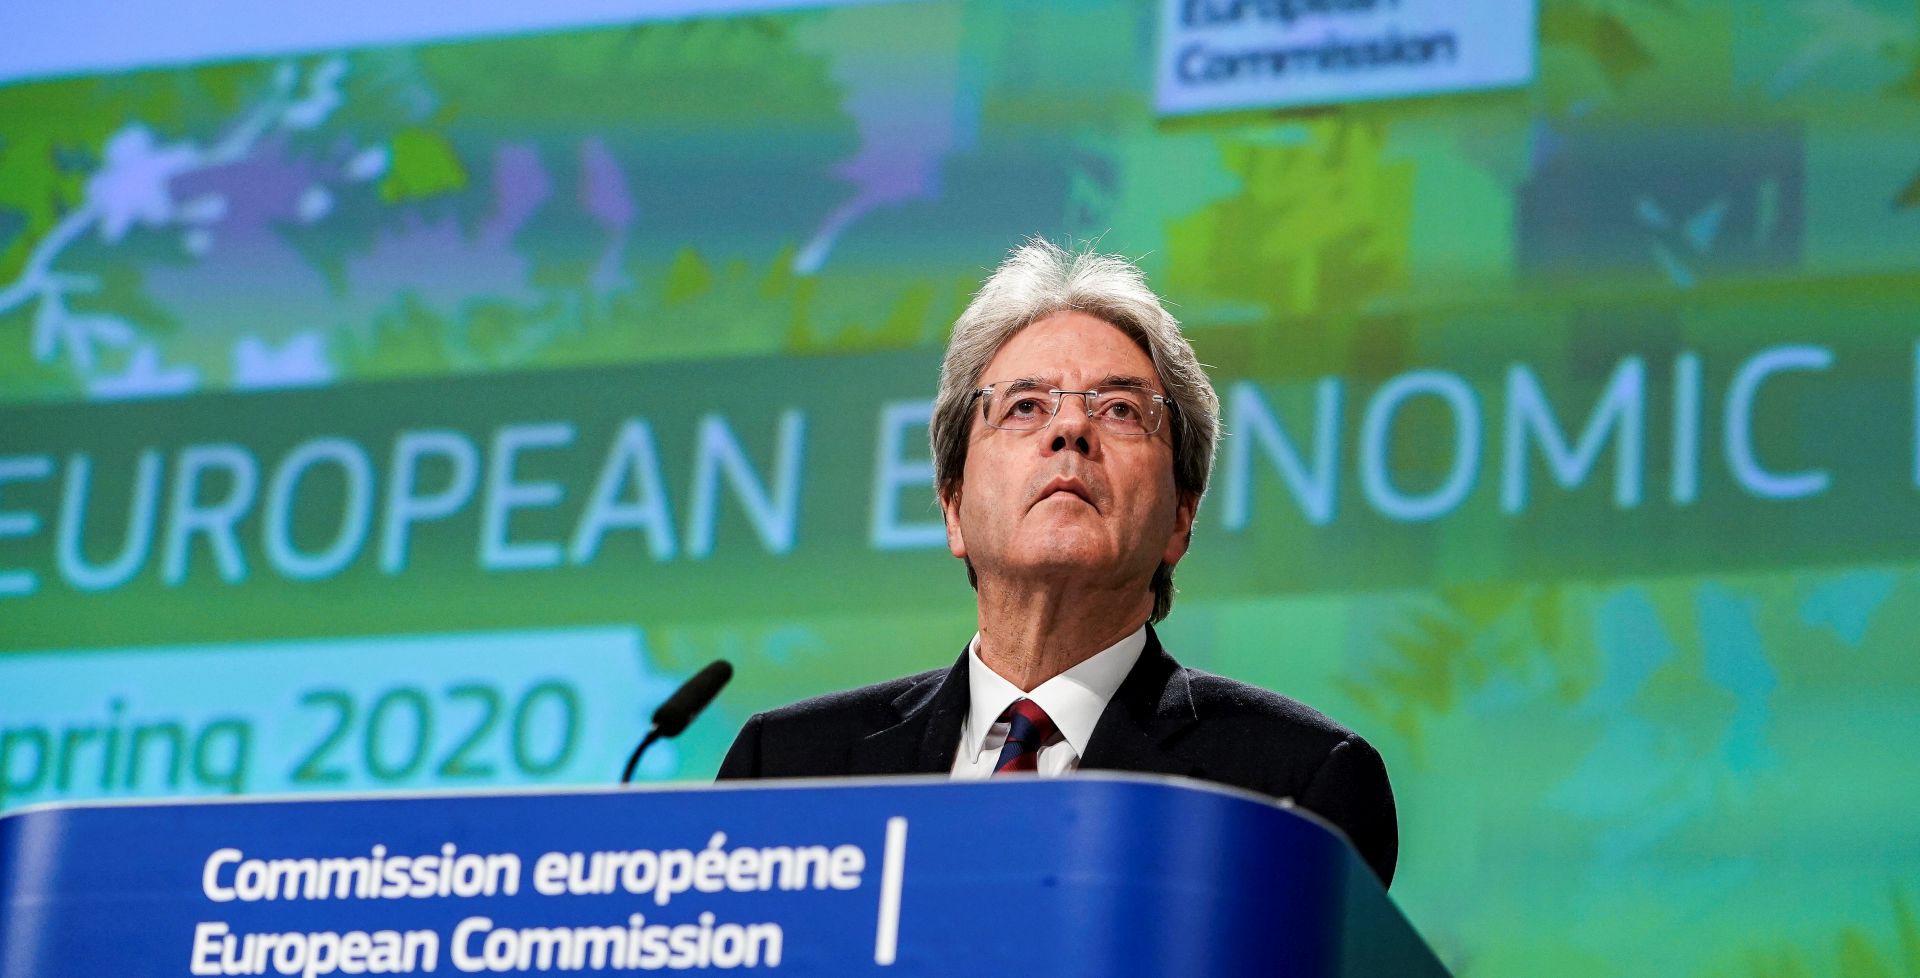 epa08404684 European Commissioner for Economy, Paolo Gentiloni speaks during a press conference on the Spring 2020 Economic Forecast in the European Union in Brussels, Belgium, 06 May 2020, amid the ongoing coronavirus COVID-19 pandemic.  EPA/KENZO TRIBOUILLARD / POOL